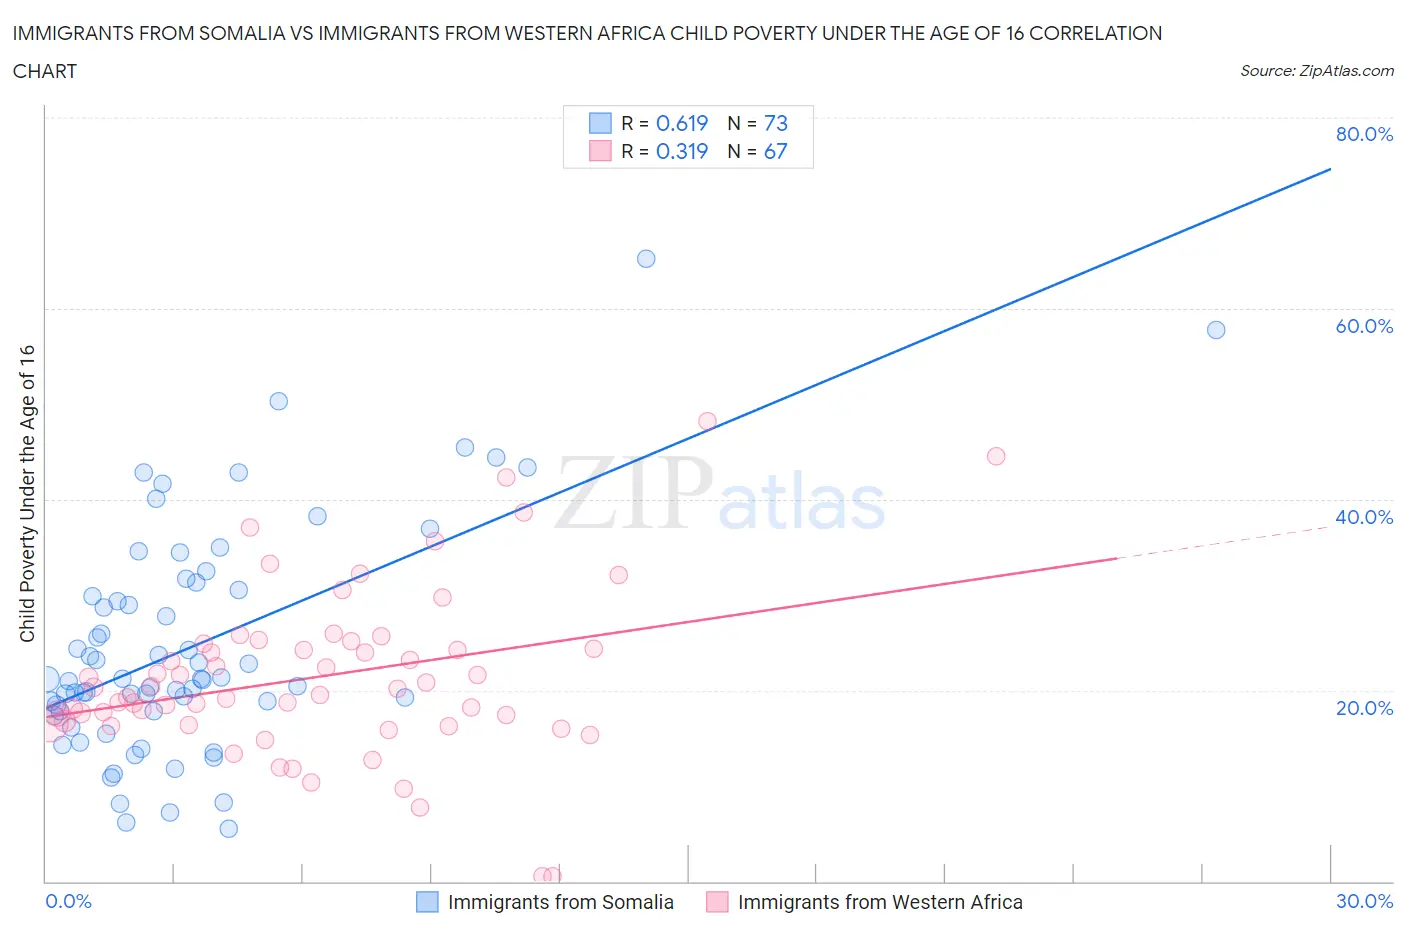 Immigrants from Somalia vs Immigrants from Western Africa Child Poverty Under the Age of 16